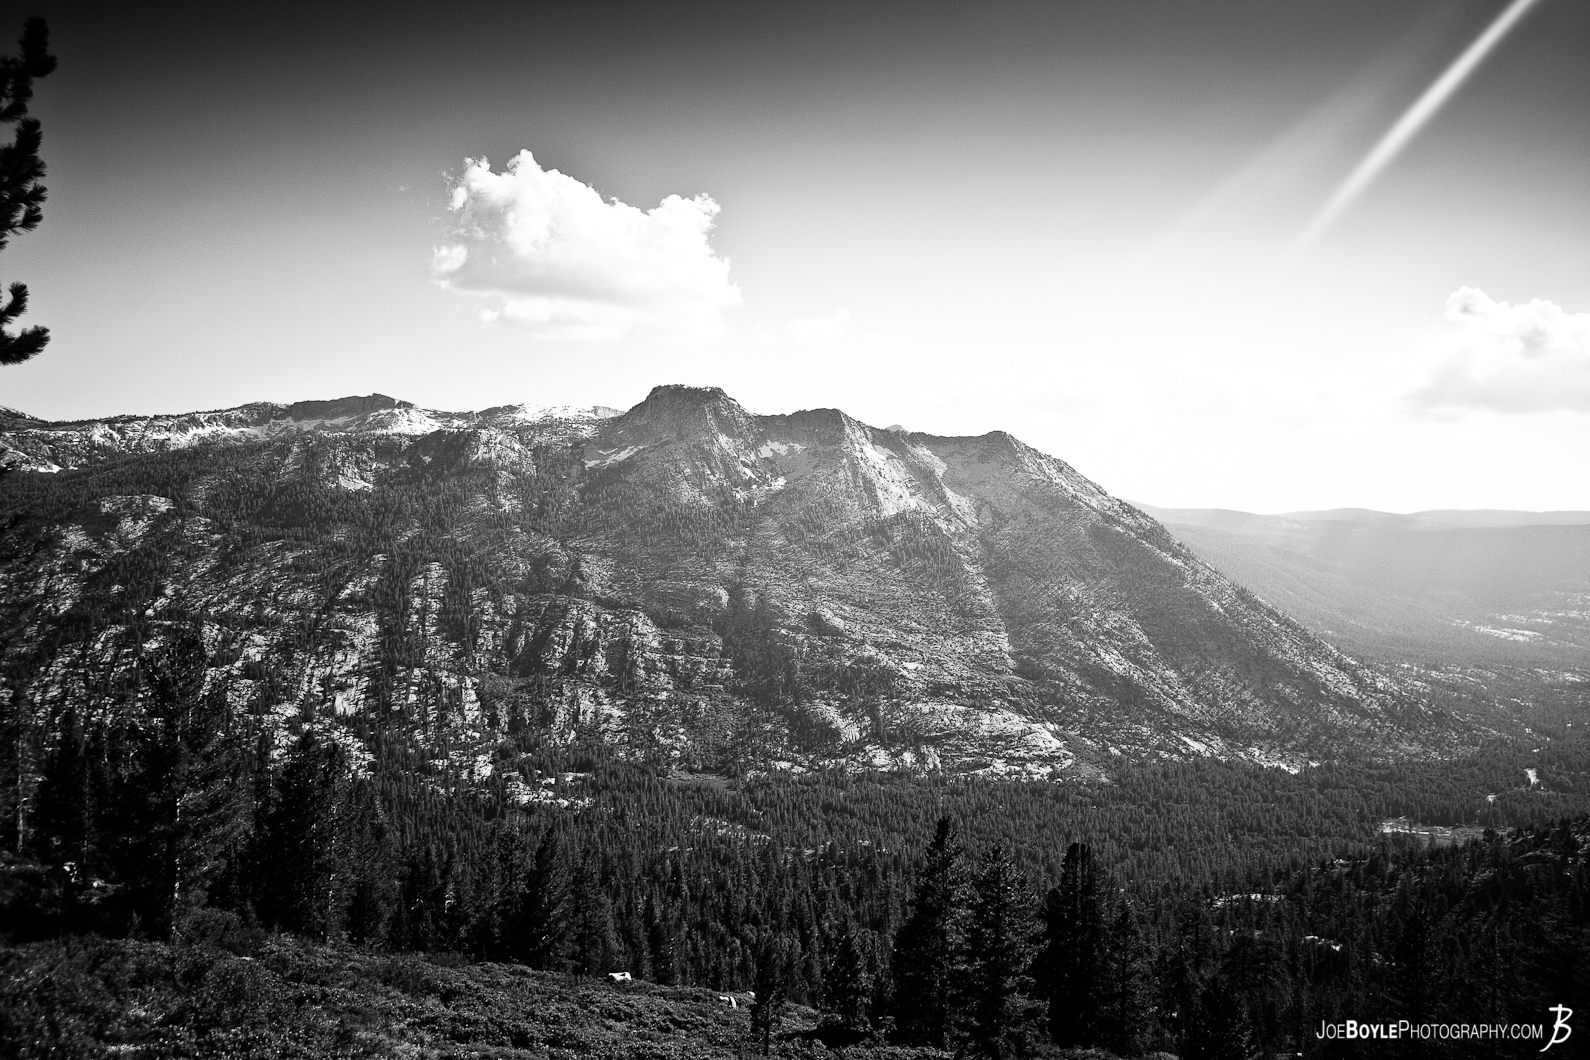  This was a mountain that I was able to capture an image of while I was hiking the John Muir Trail (JMT). 